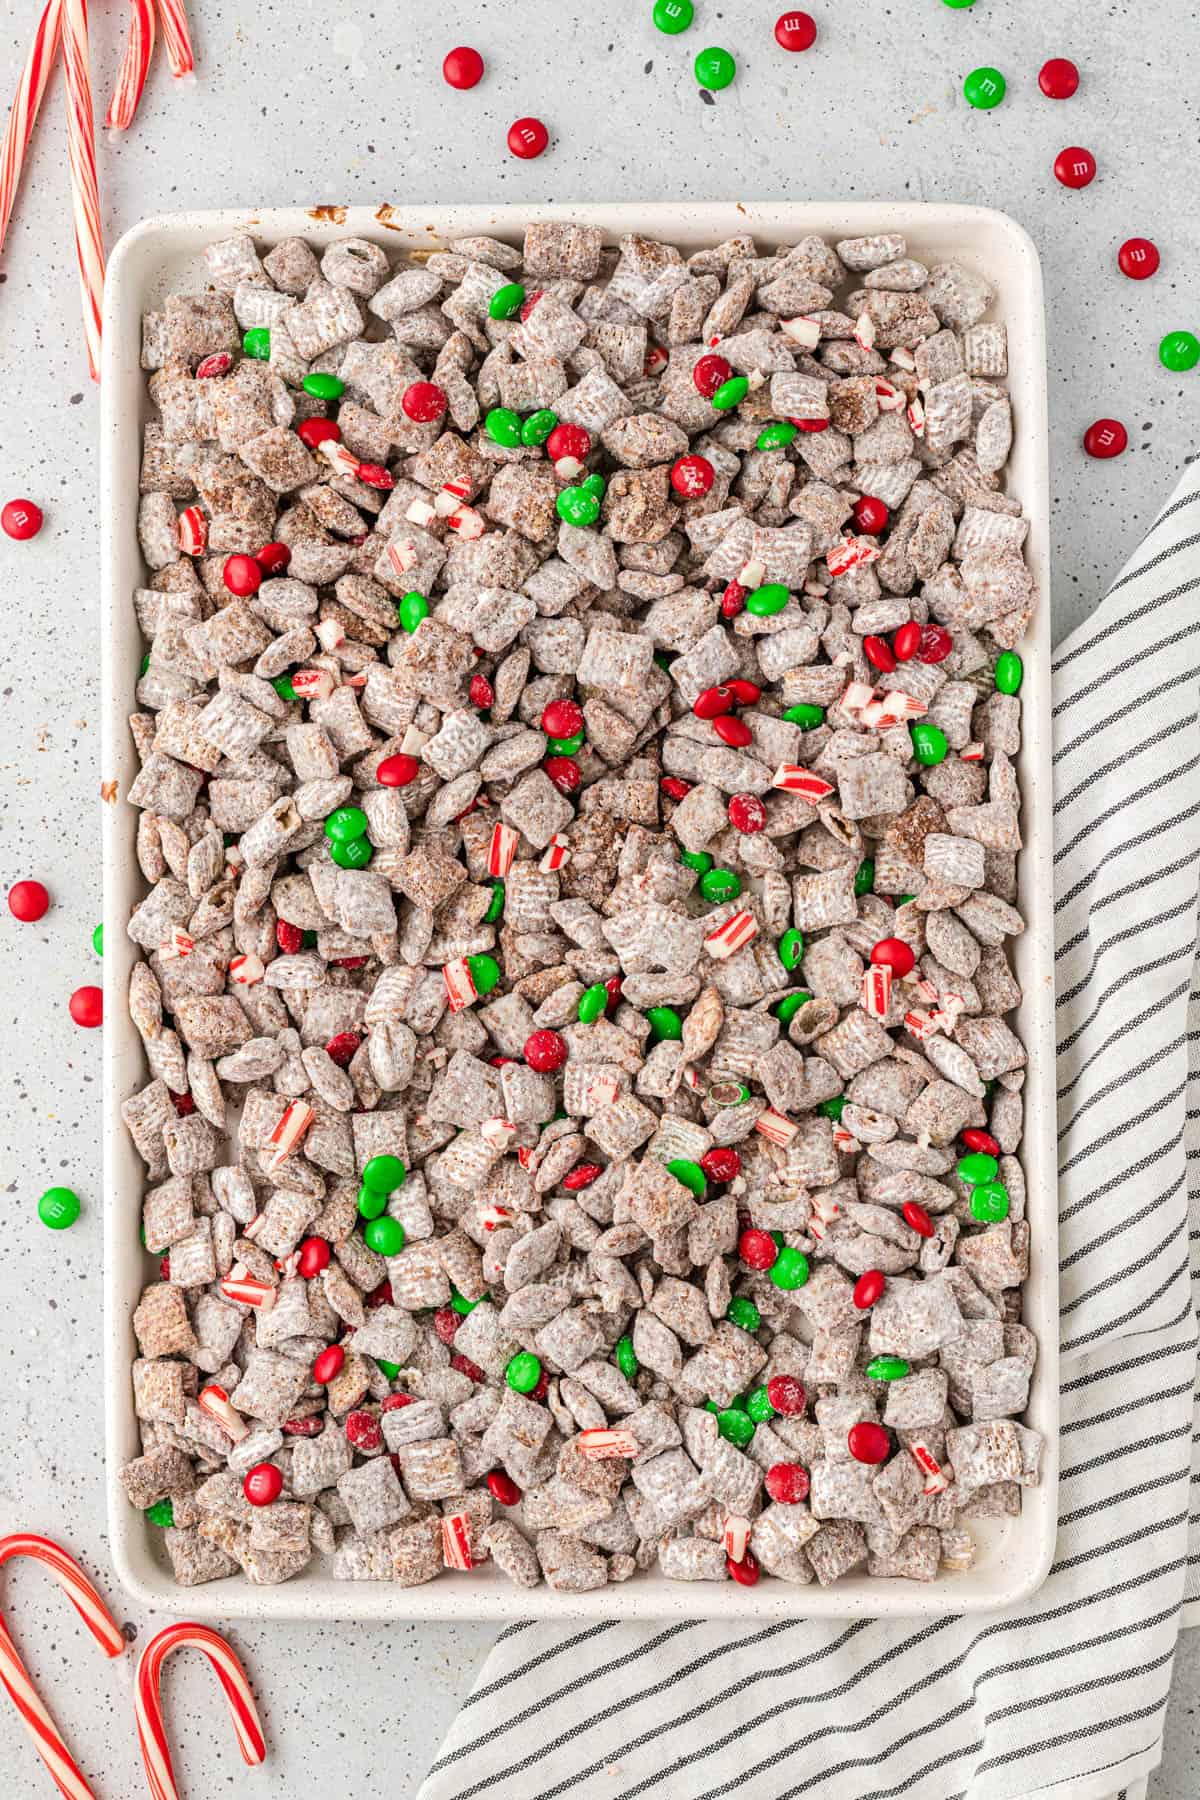 Spreading out the Christmas puppy chow on a baking sheet.